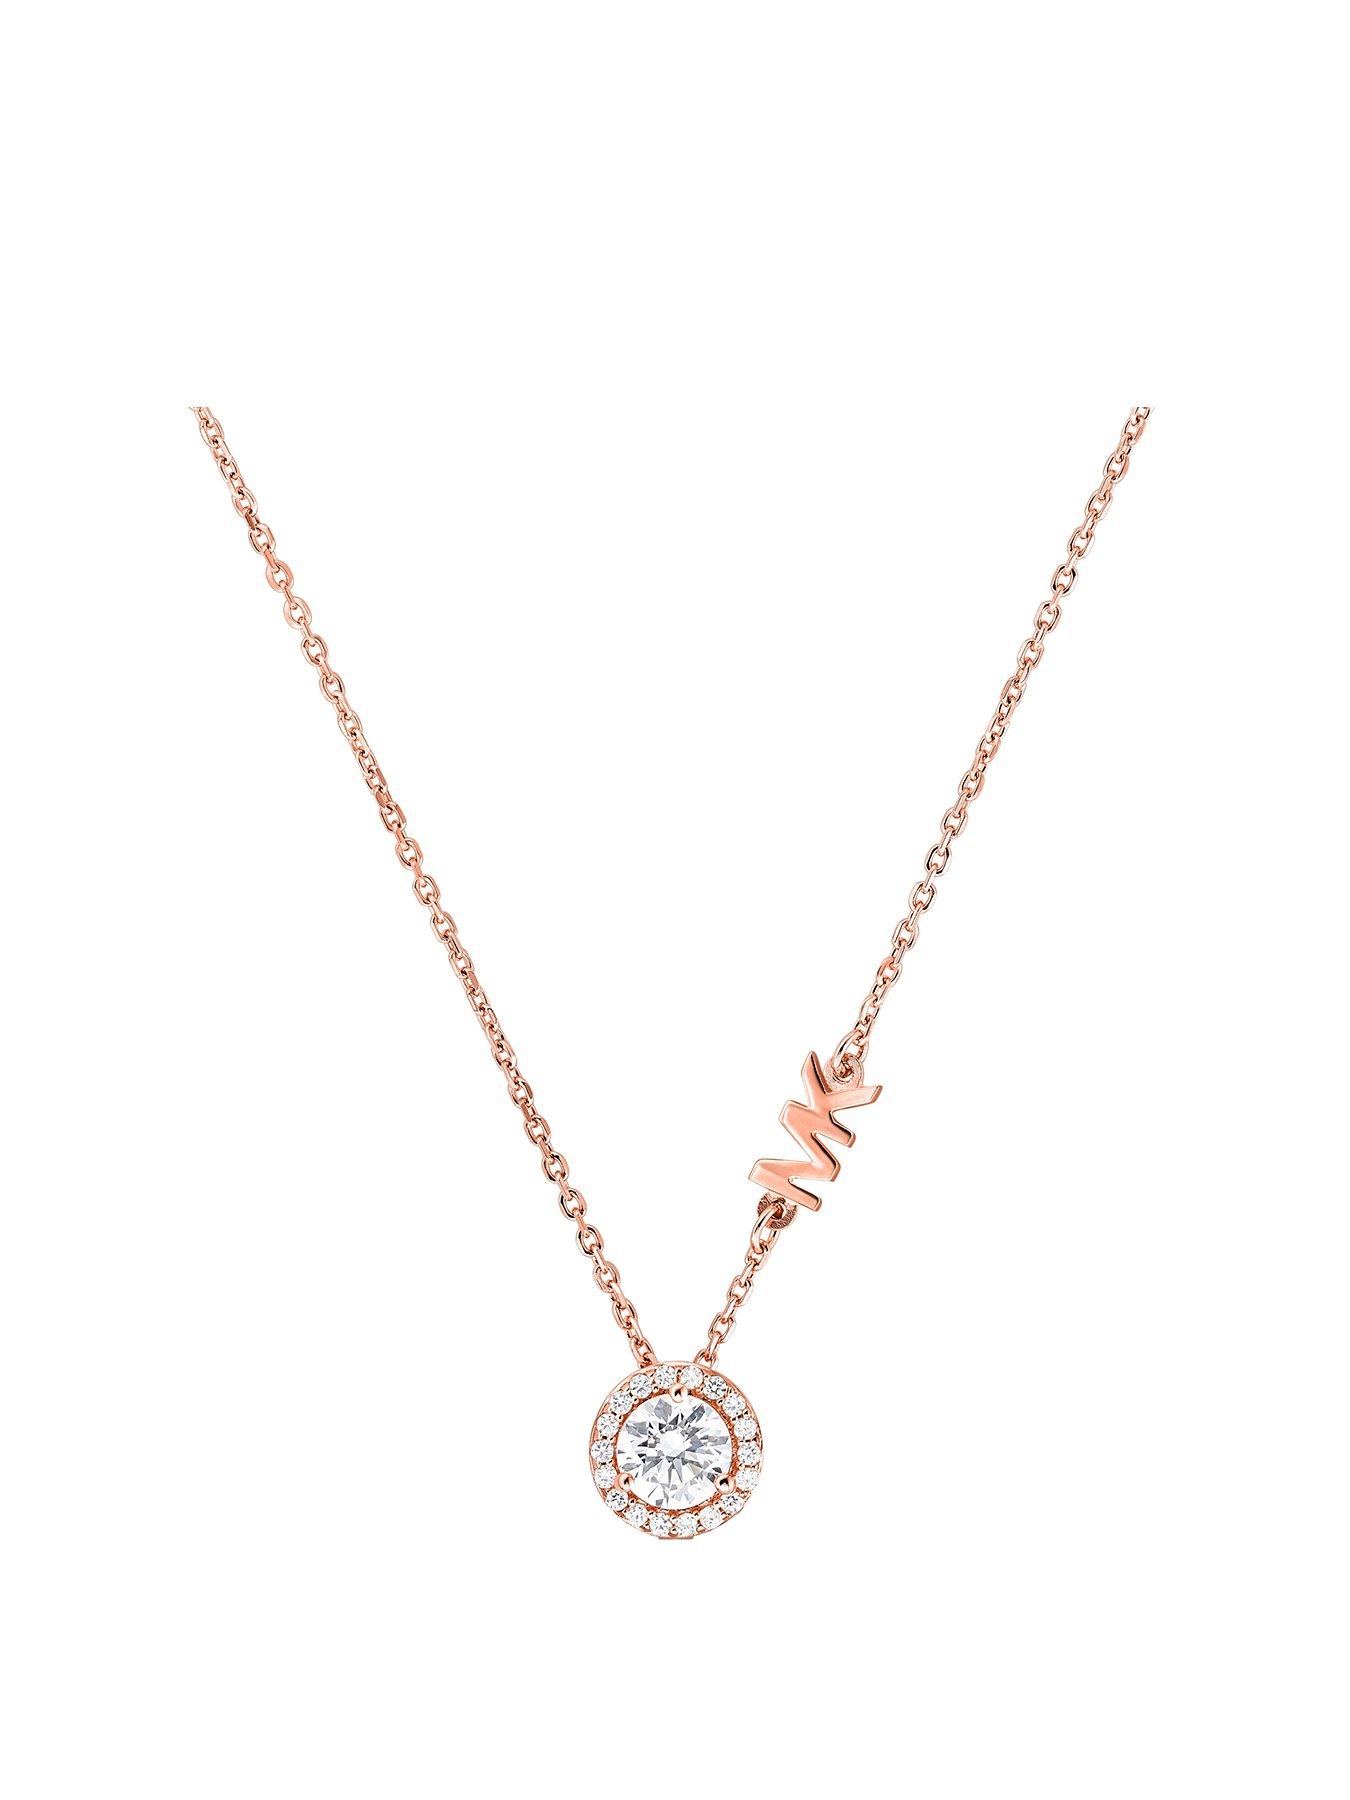  Michael Kors Rose Gold Plated Sterling Silver and Cubic Zirconia Logo Ladies Necklace